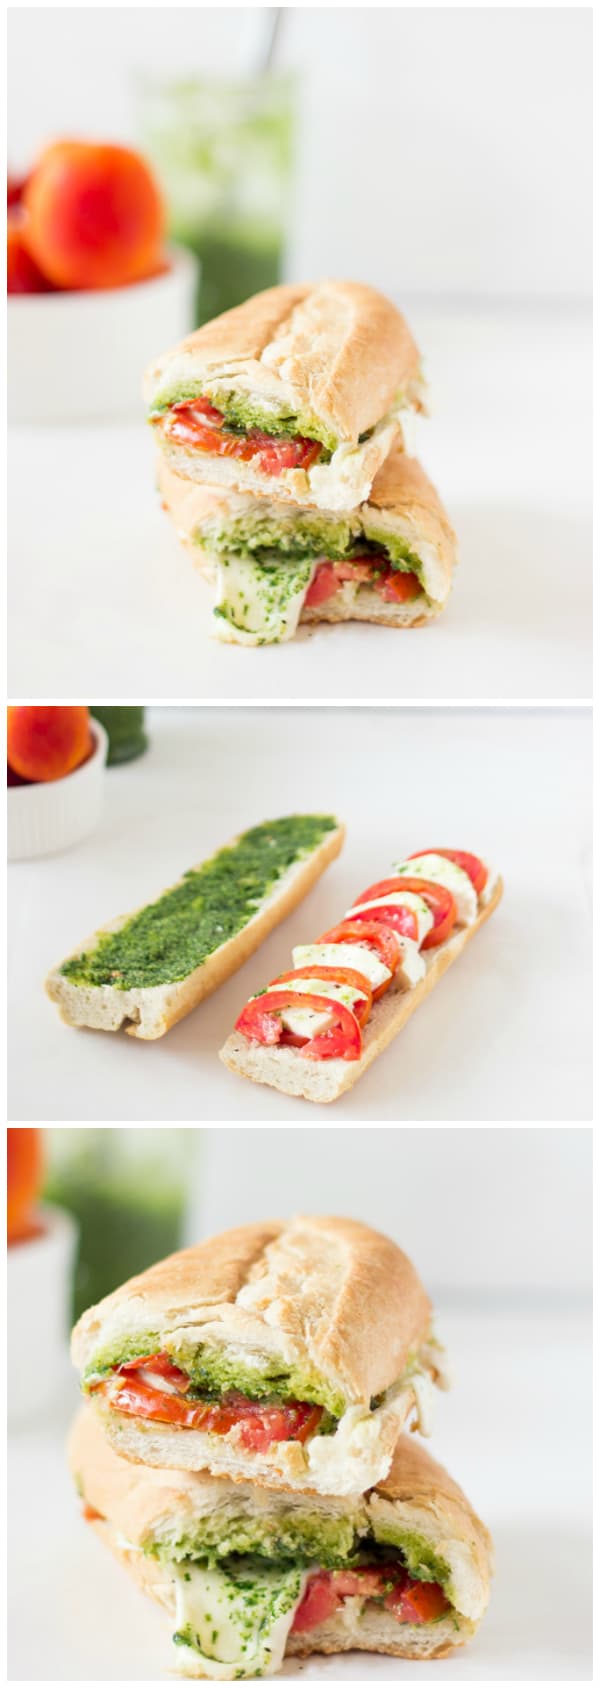 Montage of shots of a sandwich on a white table. 